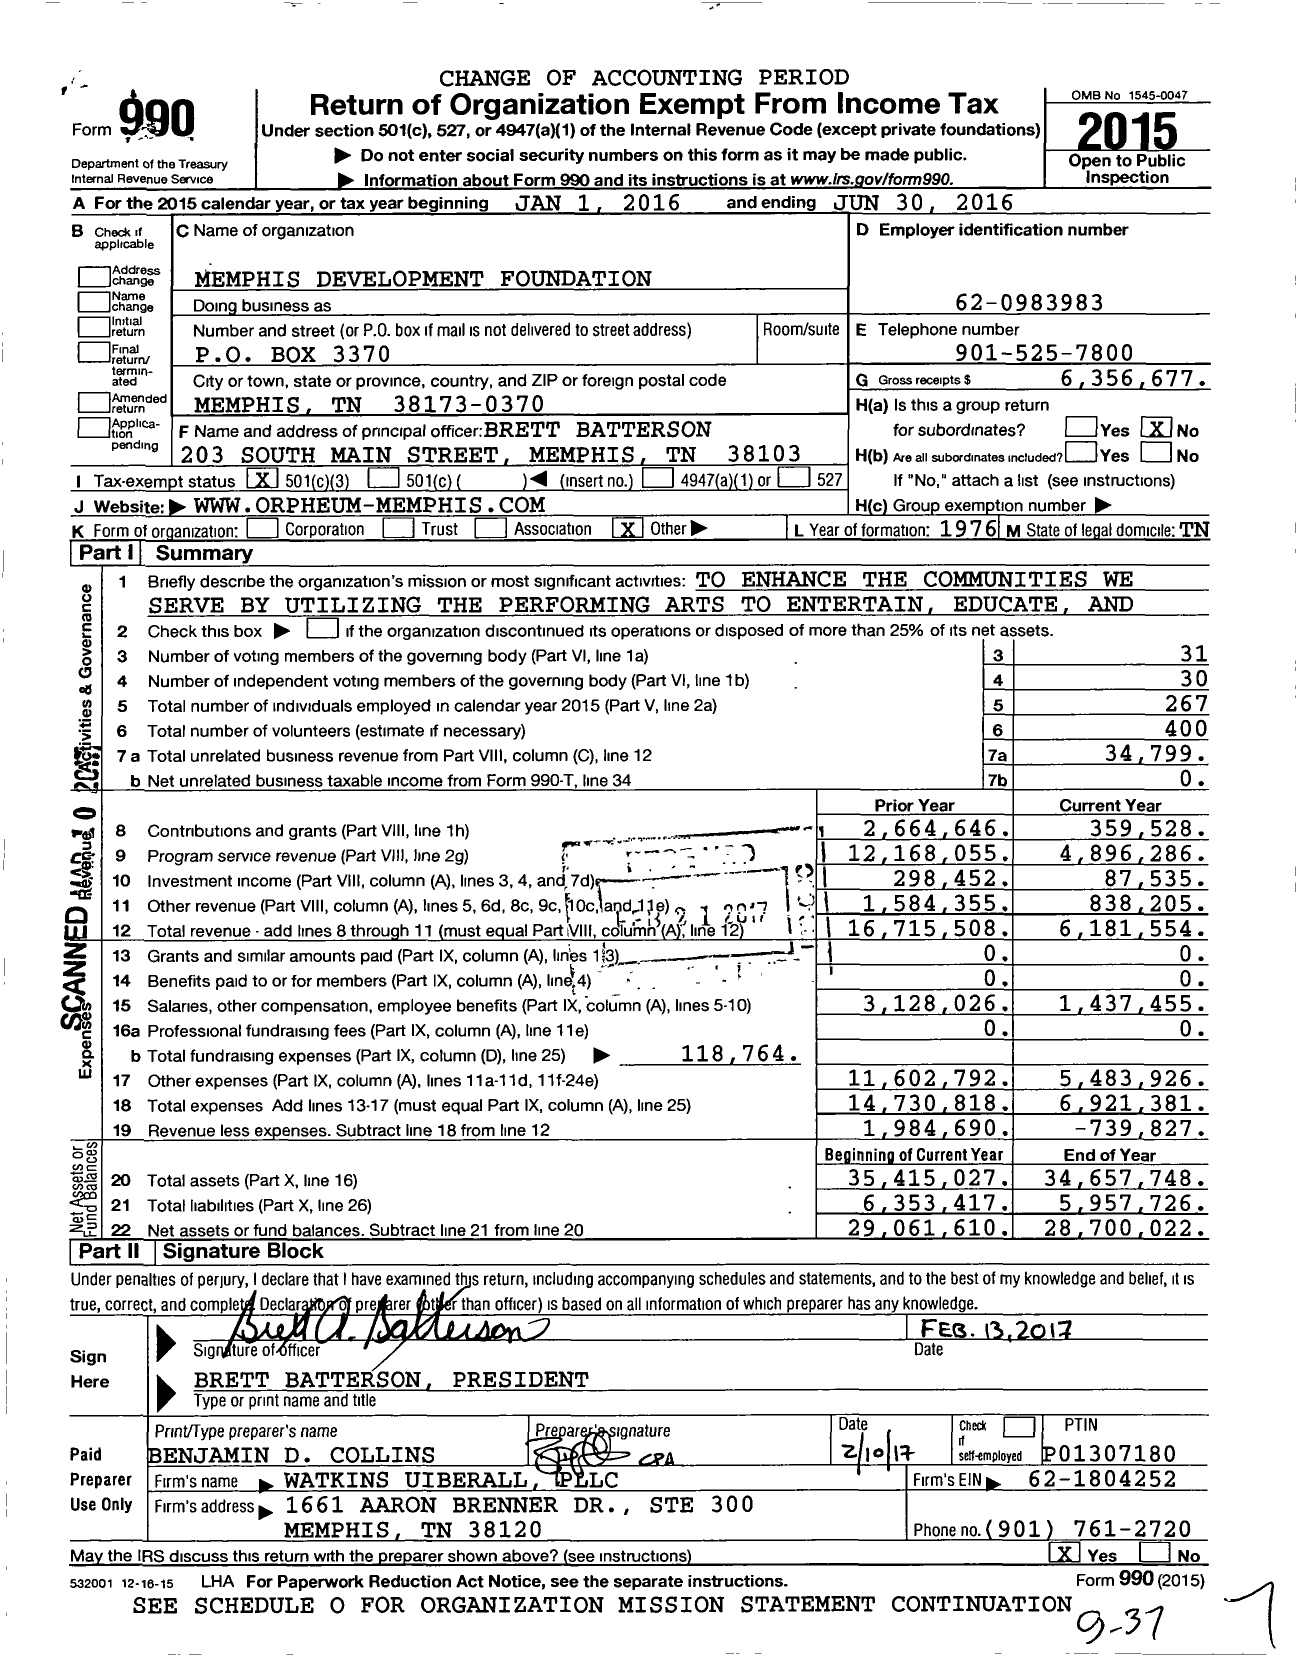 Image of first page of 2015 Form 990 for oRPHEUM THEATRE GROUP